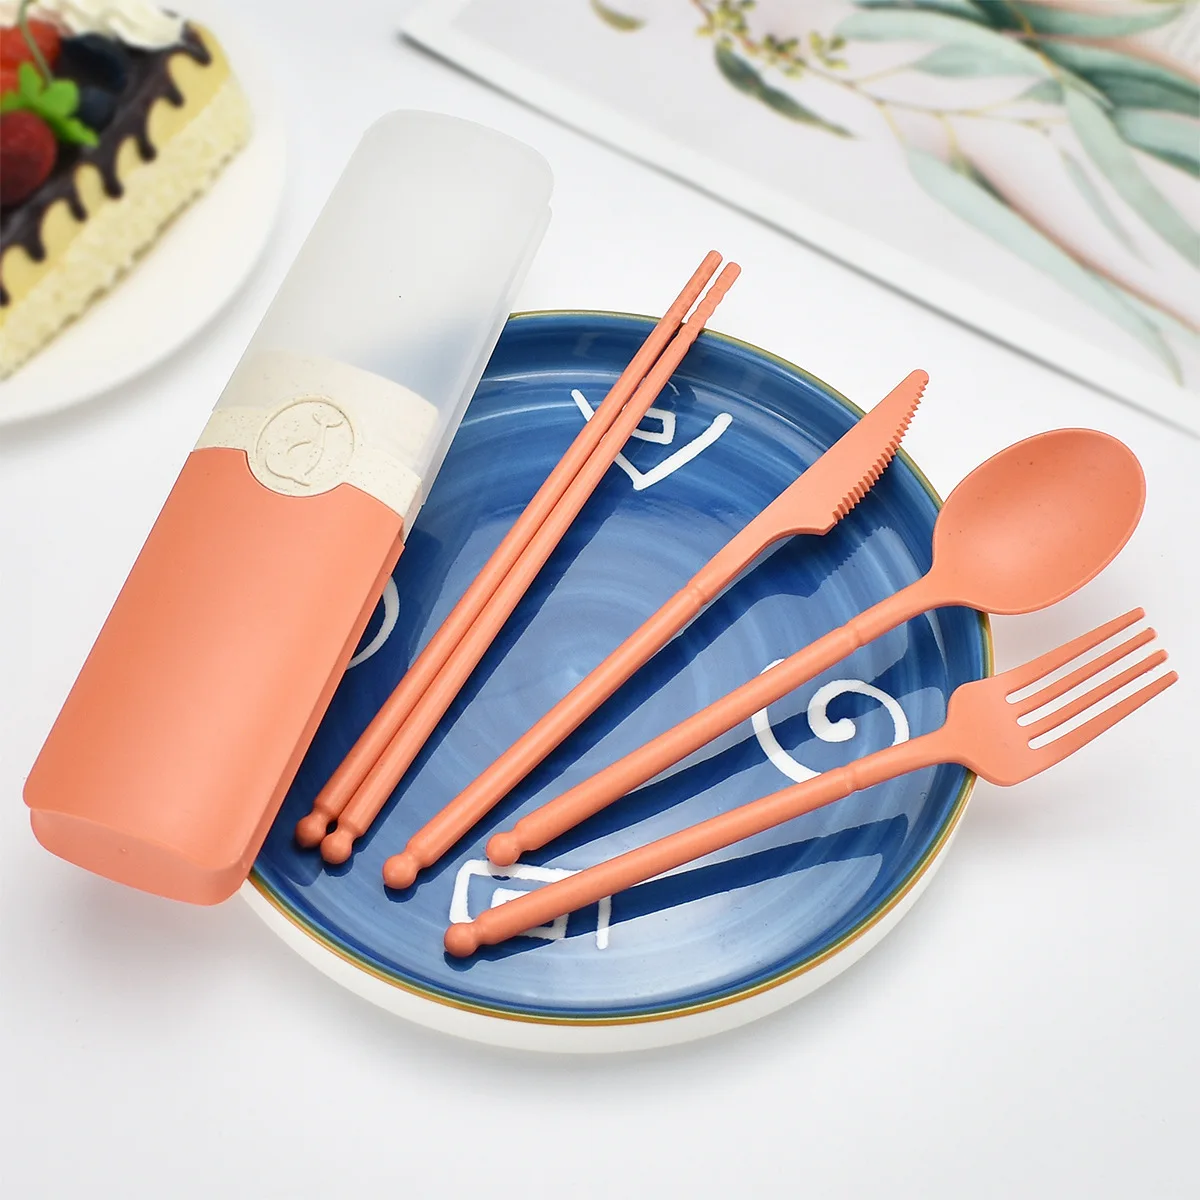 Travel Cutlery Set with Case Plastic Cutlery Set Reusable Forks